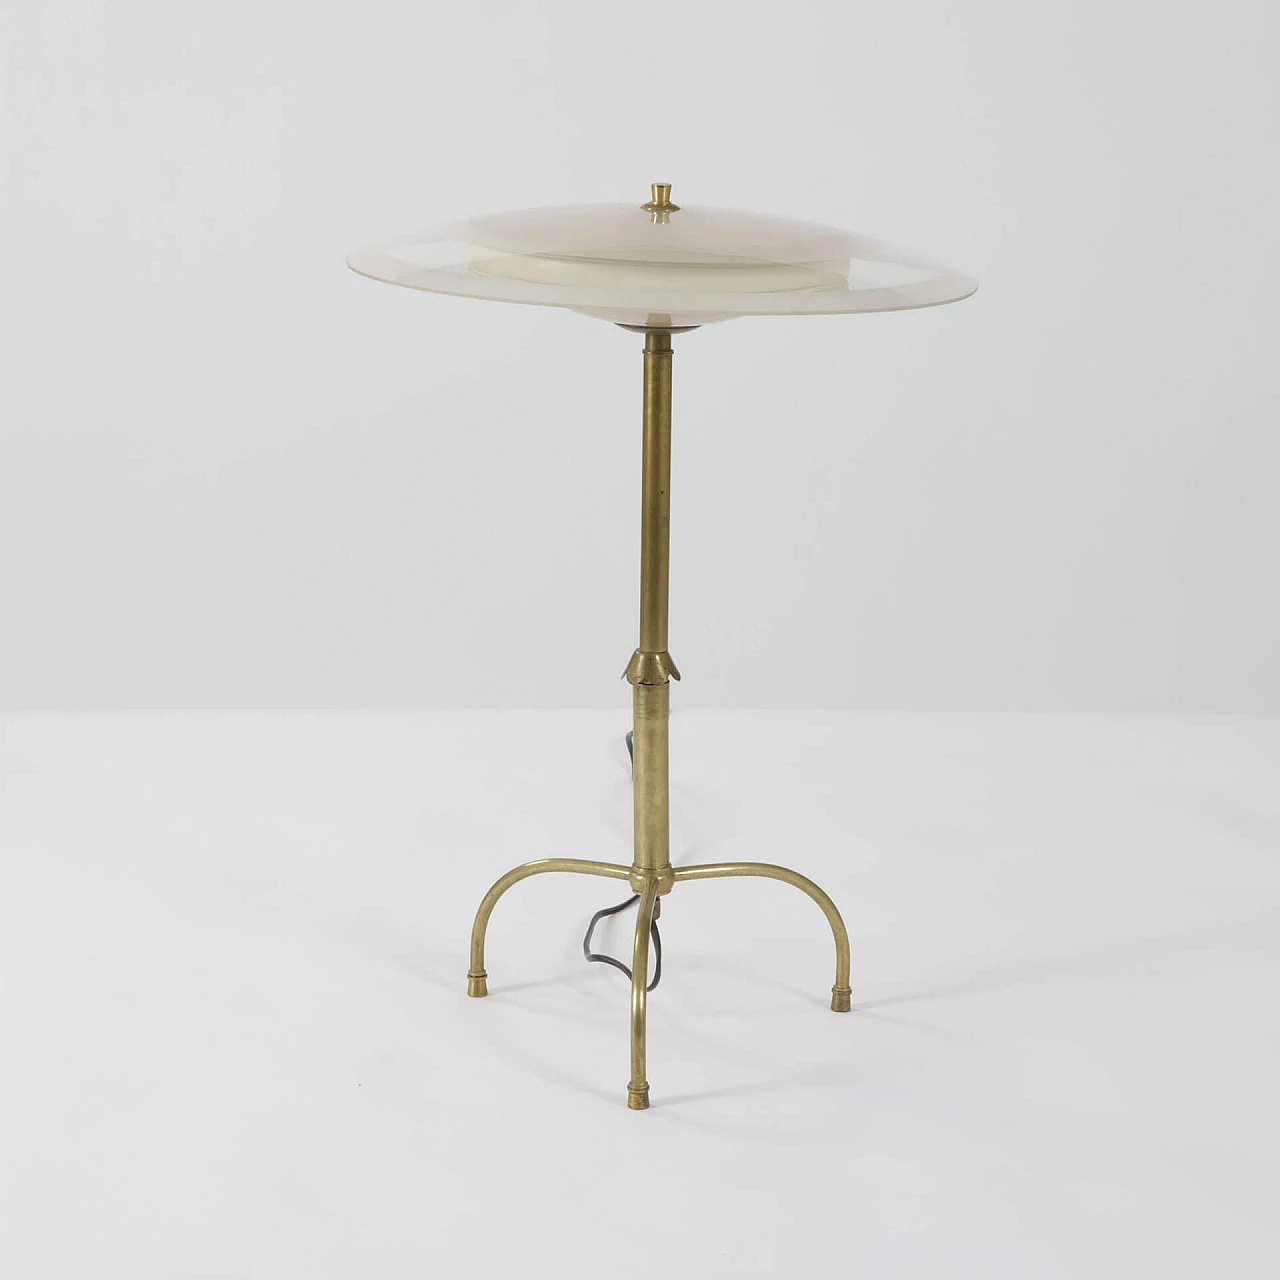 Table lamp in brass and frosted glass diffuser, 1960s 1240213